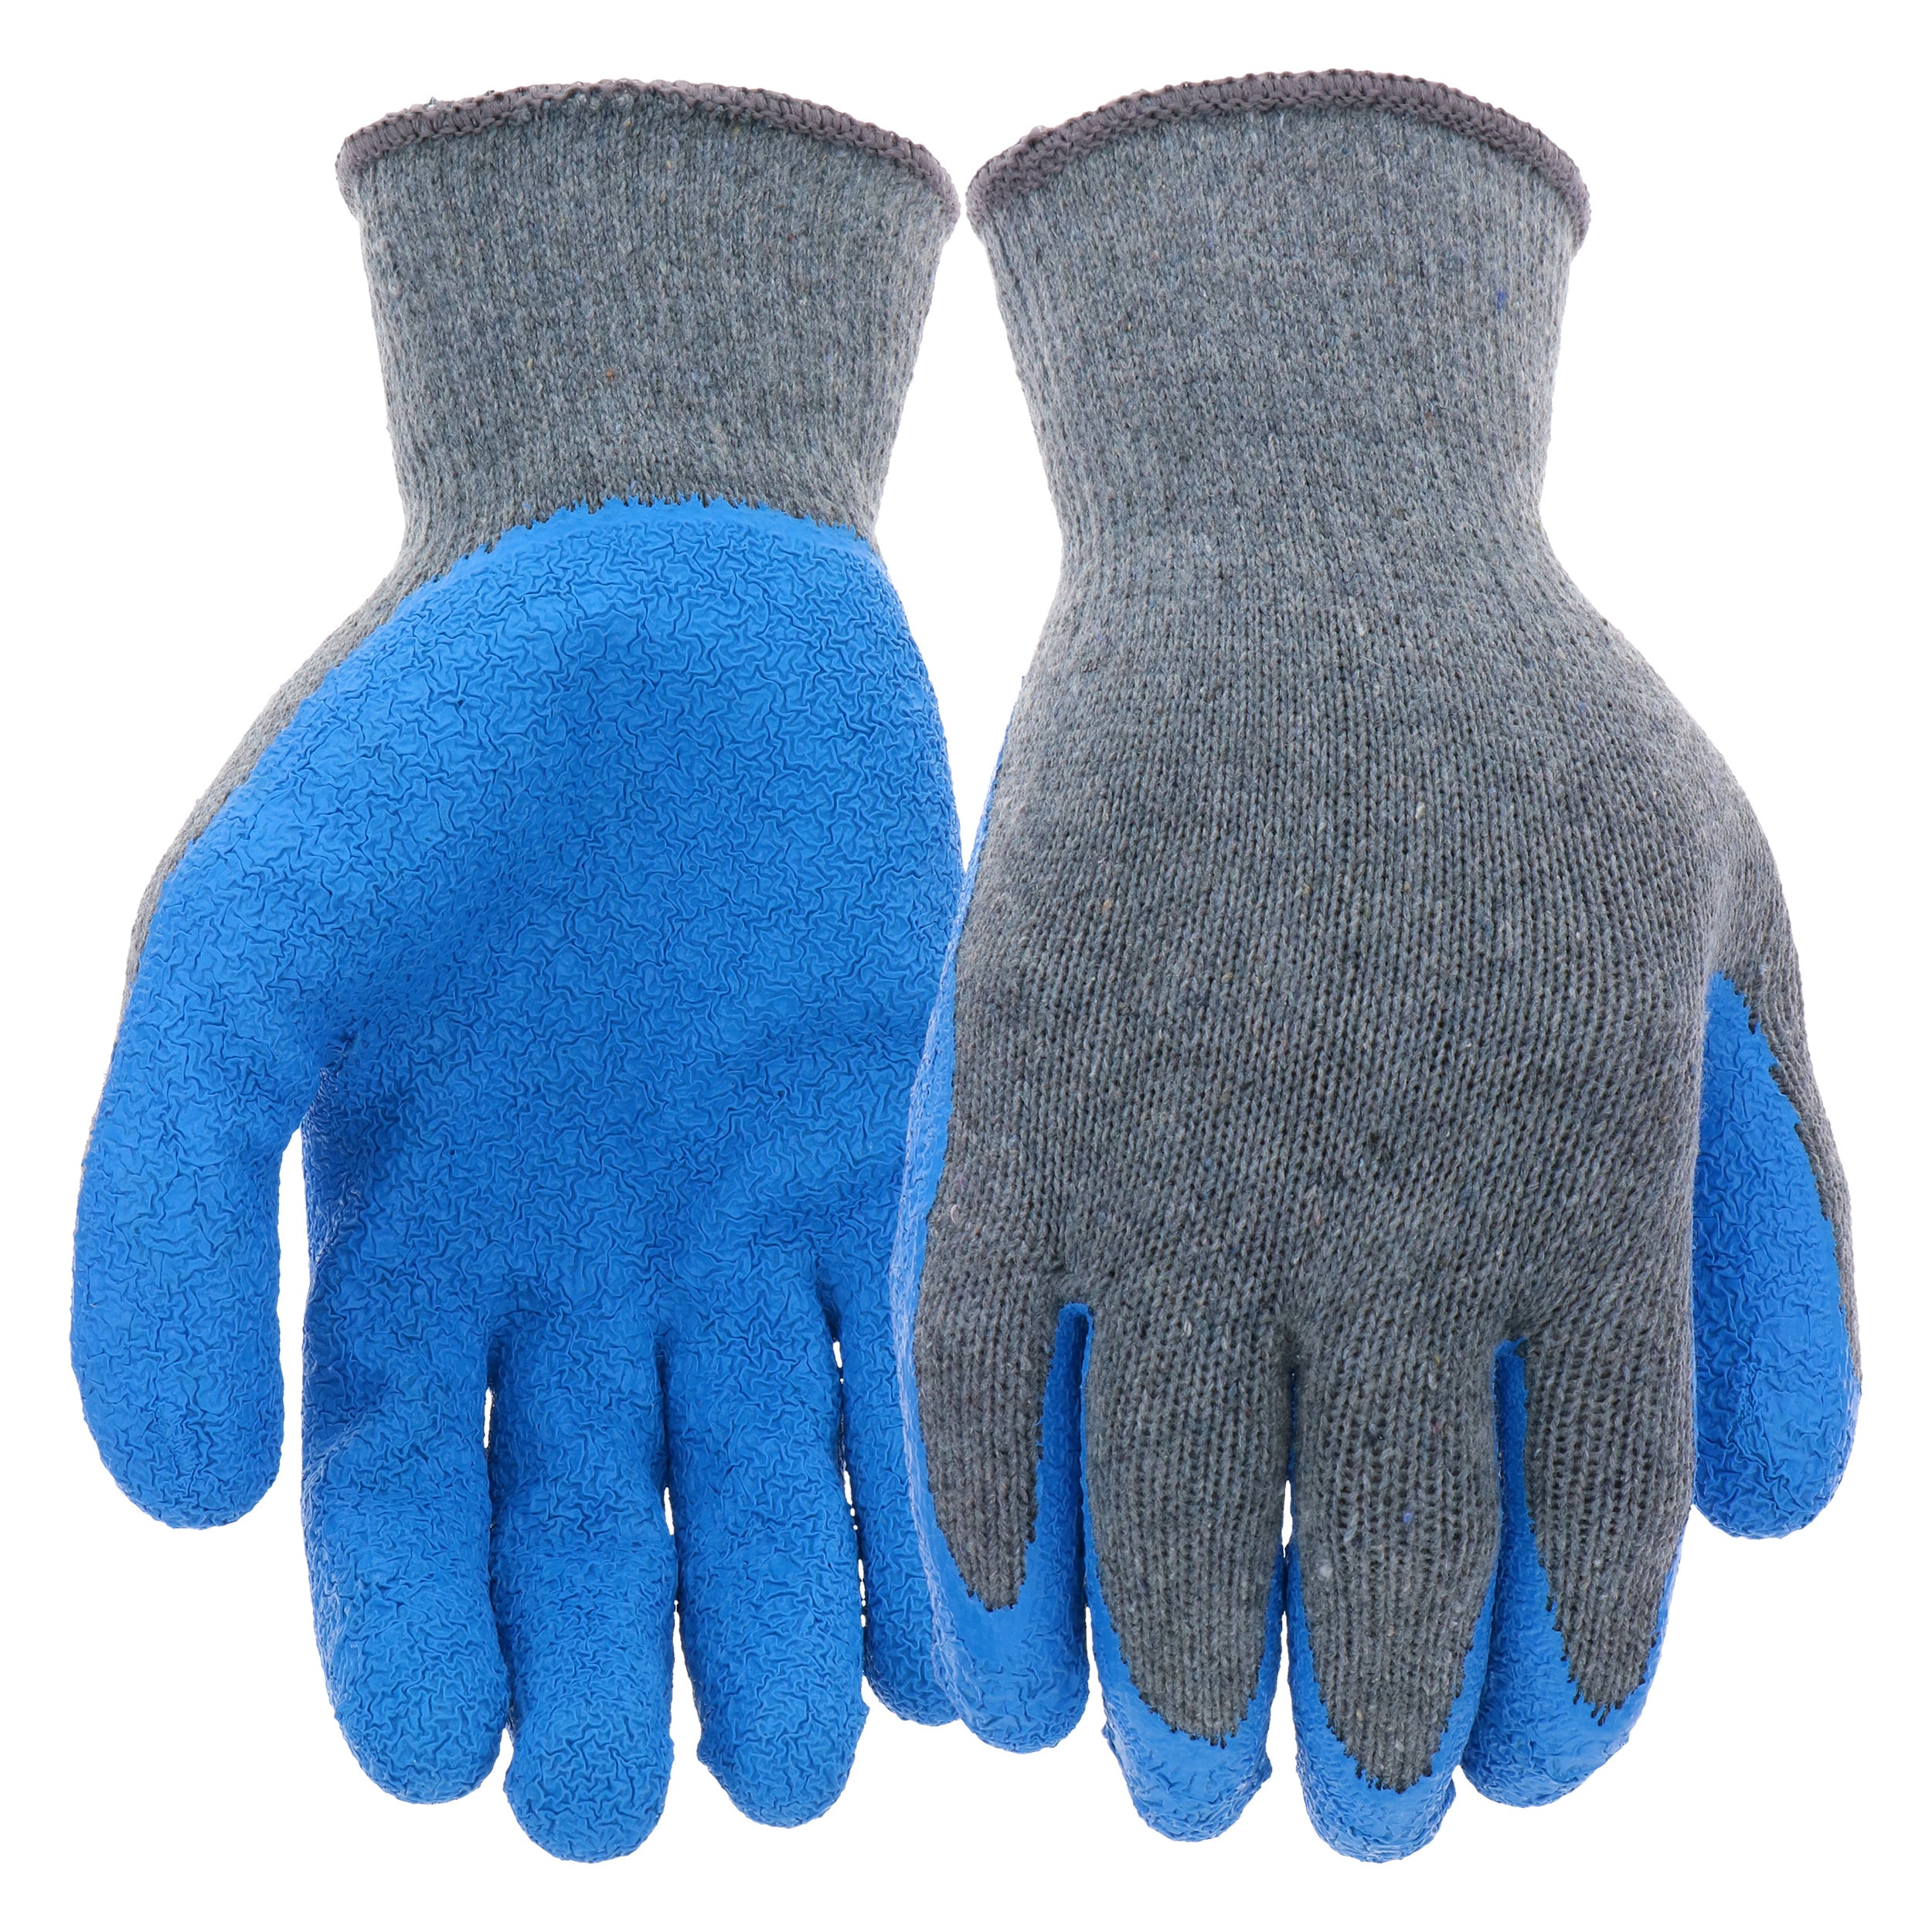 2 Pairs Heavy Duty Rubber Cleaning Gloves for Kitchen, Household,  Dishwashing, Reusable and Cotton Lined (Large Size, Blue) 